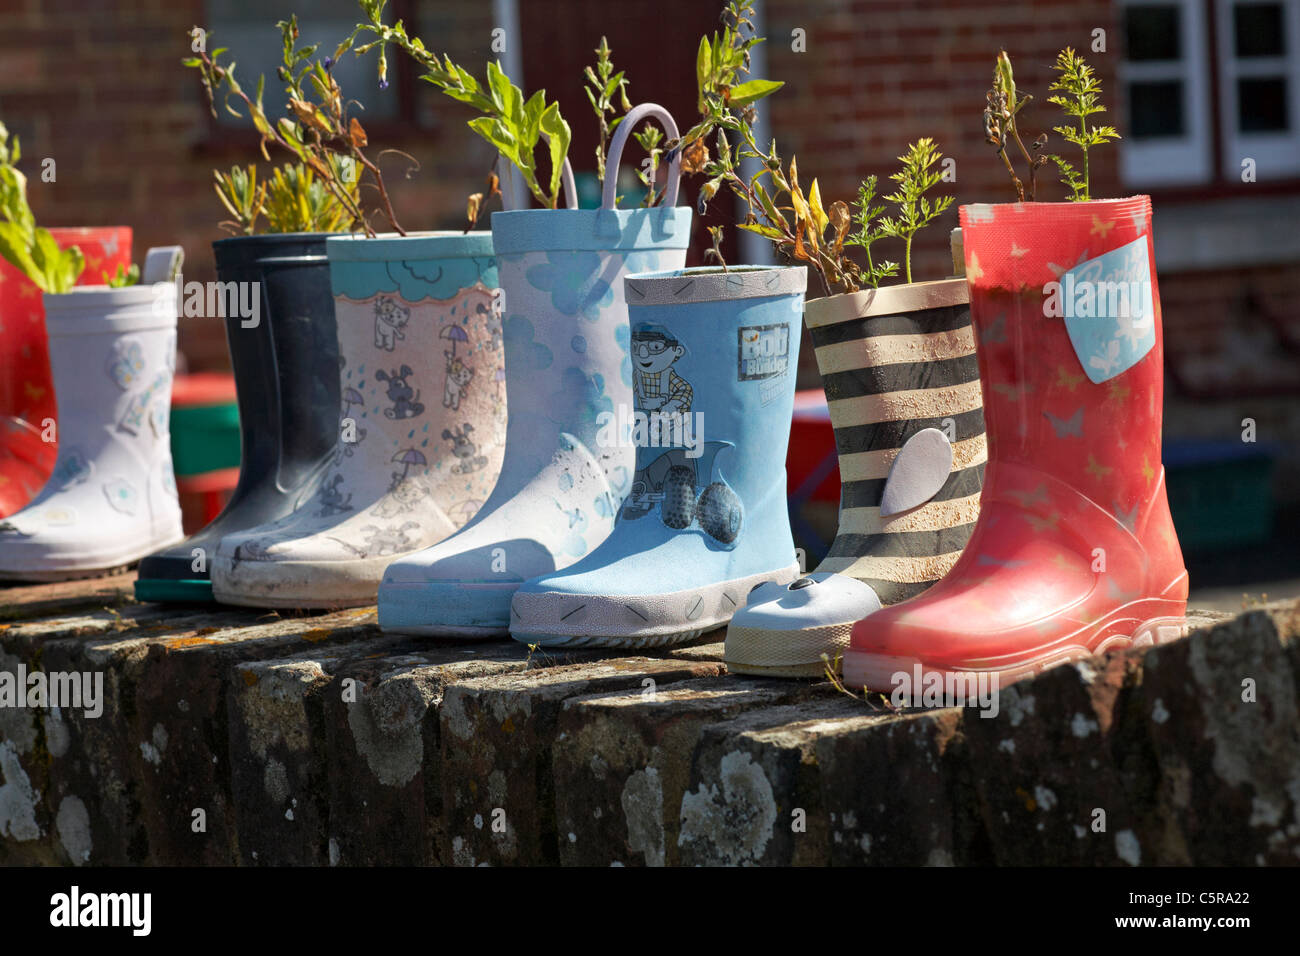 row of wellington boots on wall used for growing plants Stock Photo